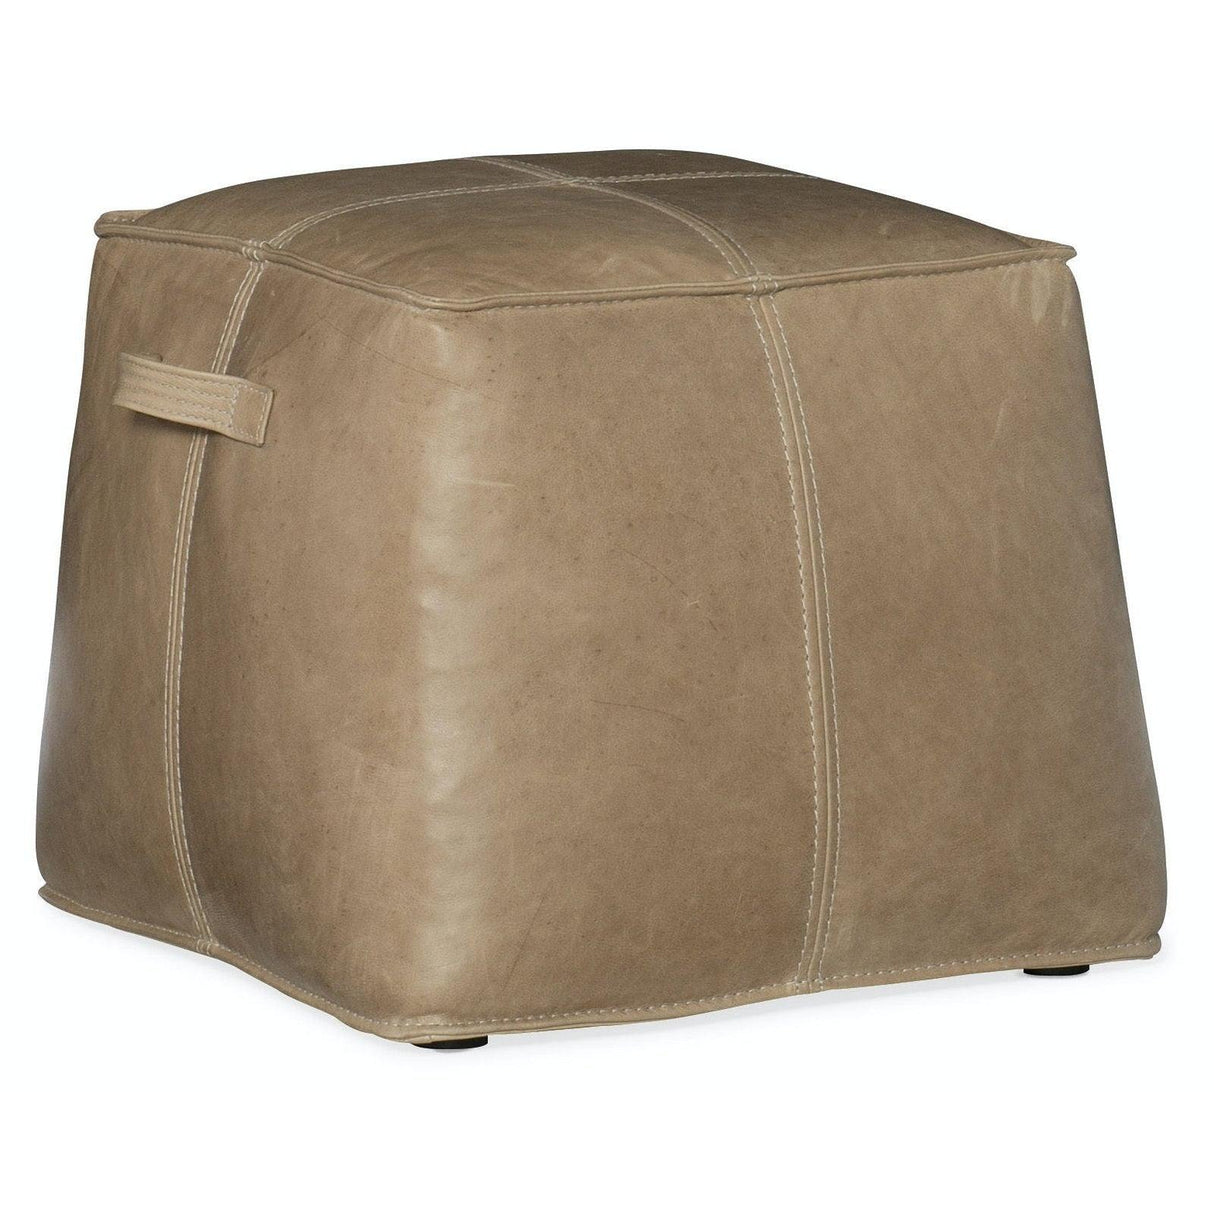 Hooker Furniture Dizzy Small Leather Ottoman